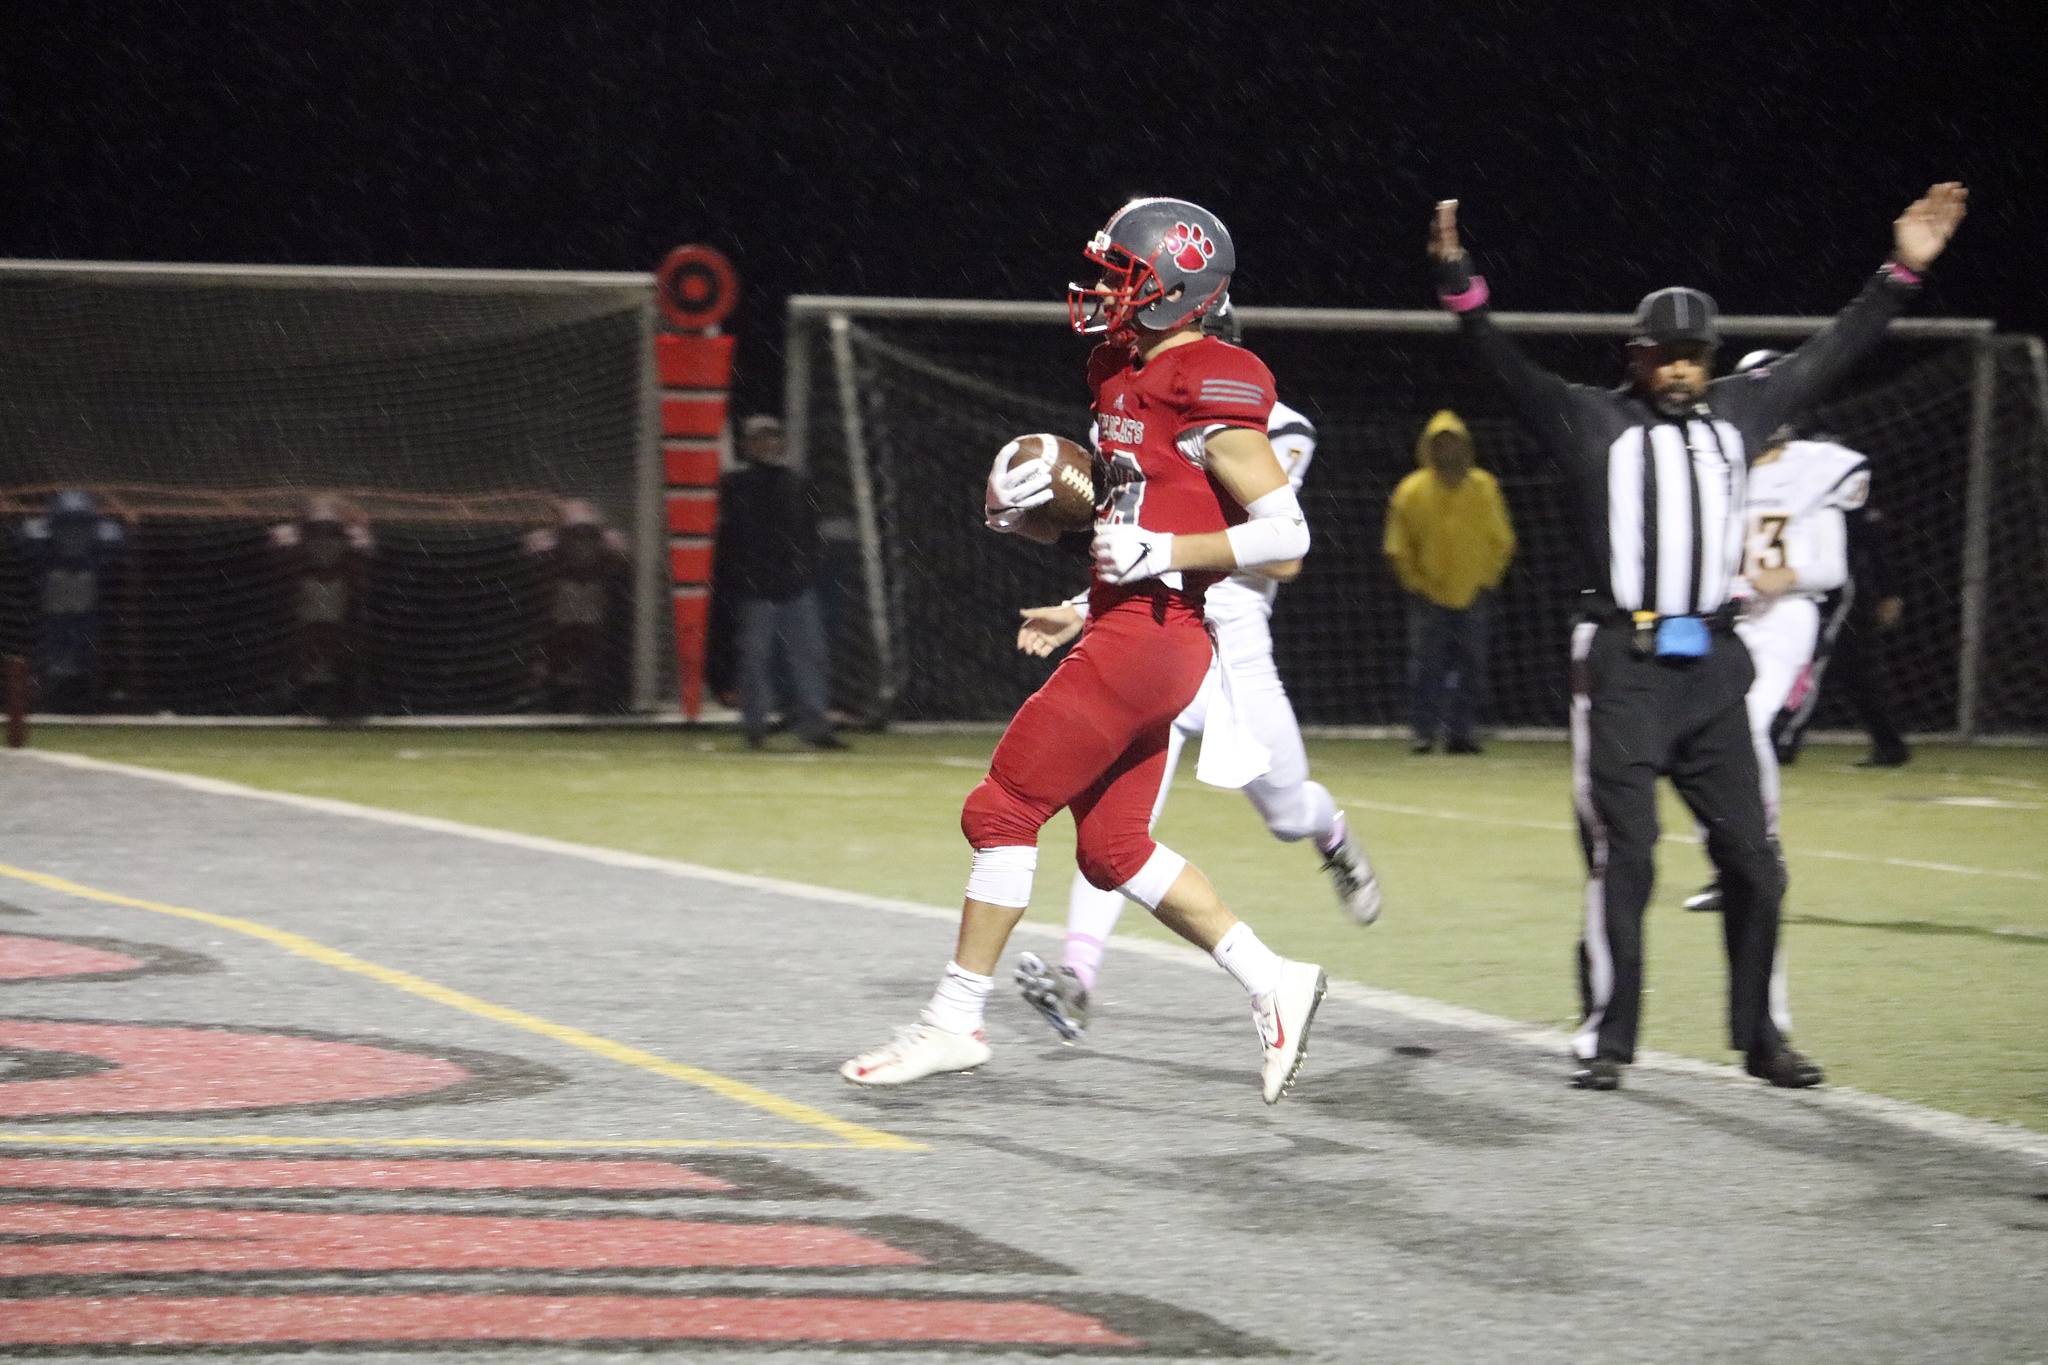 Evan Pappas/Staff Photo                                Bonda jumps into the end zone during the Homecoming game on Friday, Oct. 21 for his second touchdown of the night.